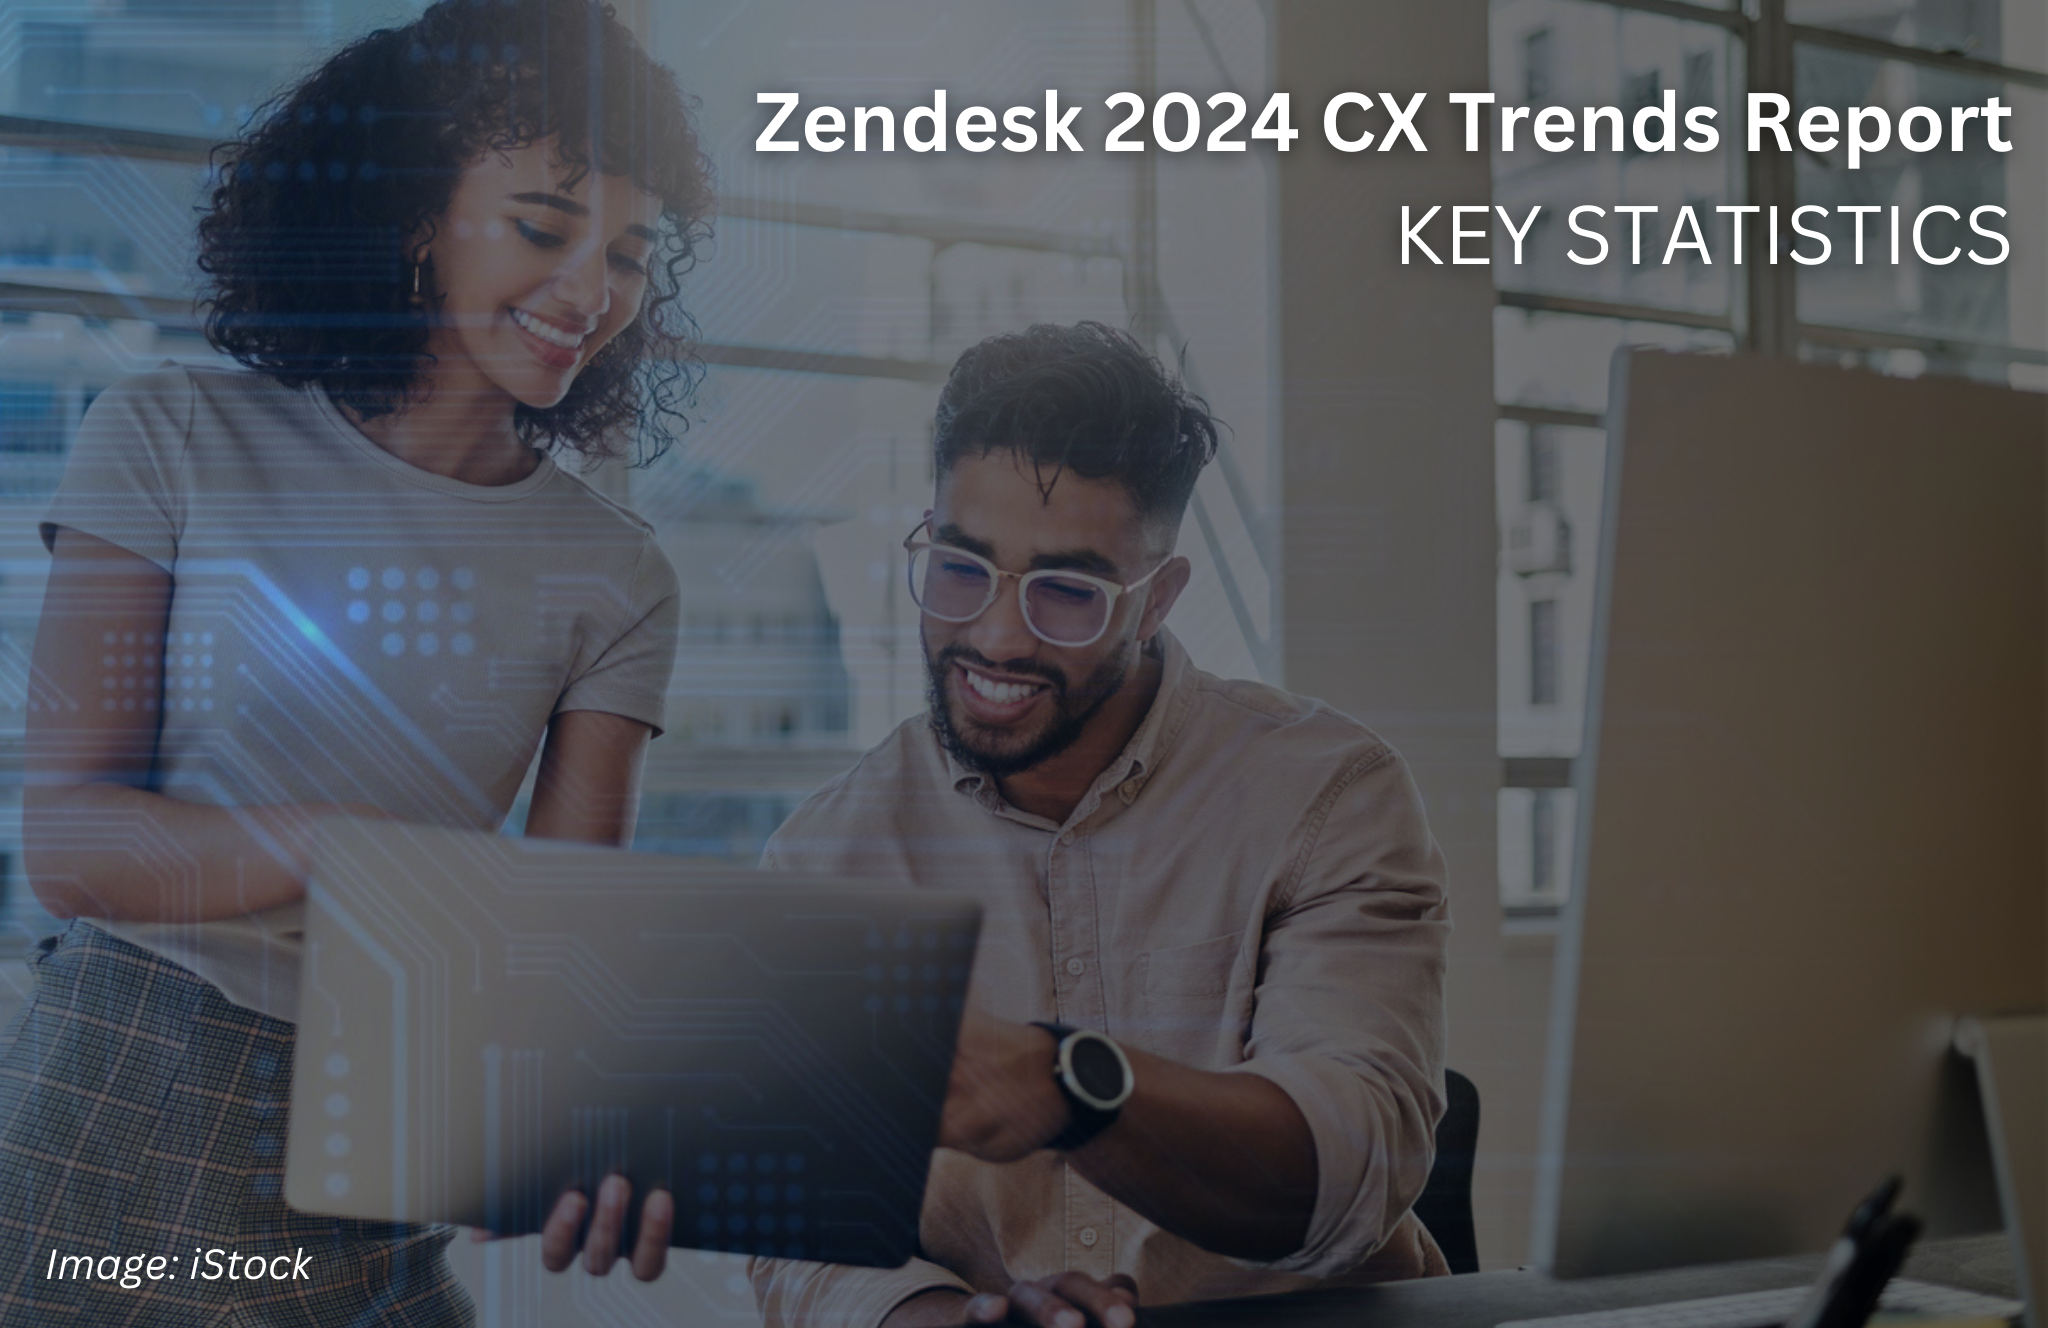 <h3>Click below to view key stats from this year's Zendesk 2024 CX Trends Report</h3>